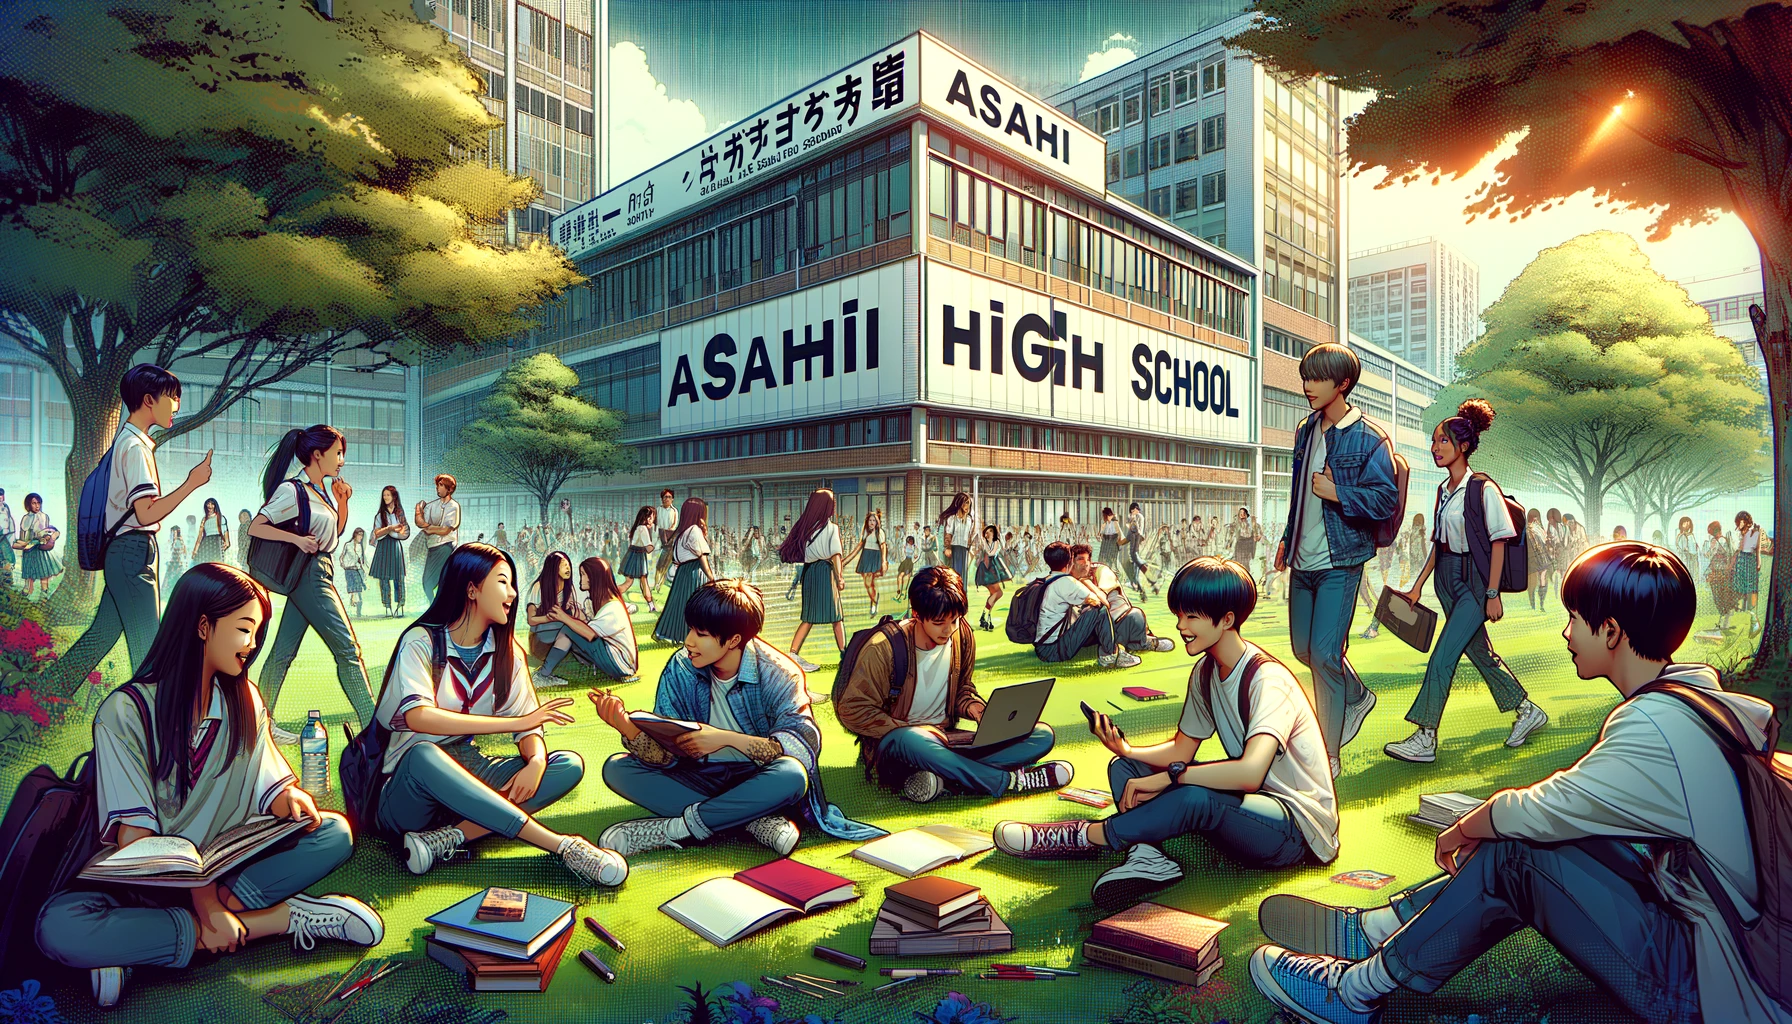 A dynamic scene at Asahi High School focusing specifically on the students, showcasing the school's popularity. The image captures a group of students from diverse backgrounds, actively engaged in a lively discussion outdoors. They are sitting on the grass with books and laptops, under the shade of trees, showcasing a typical day of student life. Some students are walking by, chatting and laughing. The school buildings in the background blend modern and traditional architecture. Prominently, the word 'ASAHI' is displayed in bold English letters across the top of the image, highlighting the school's identity.